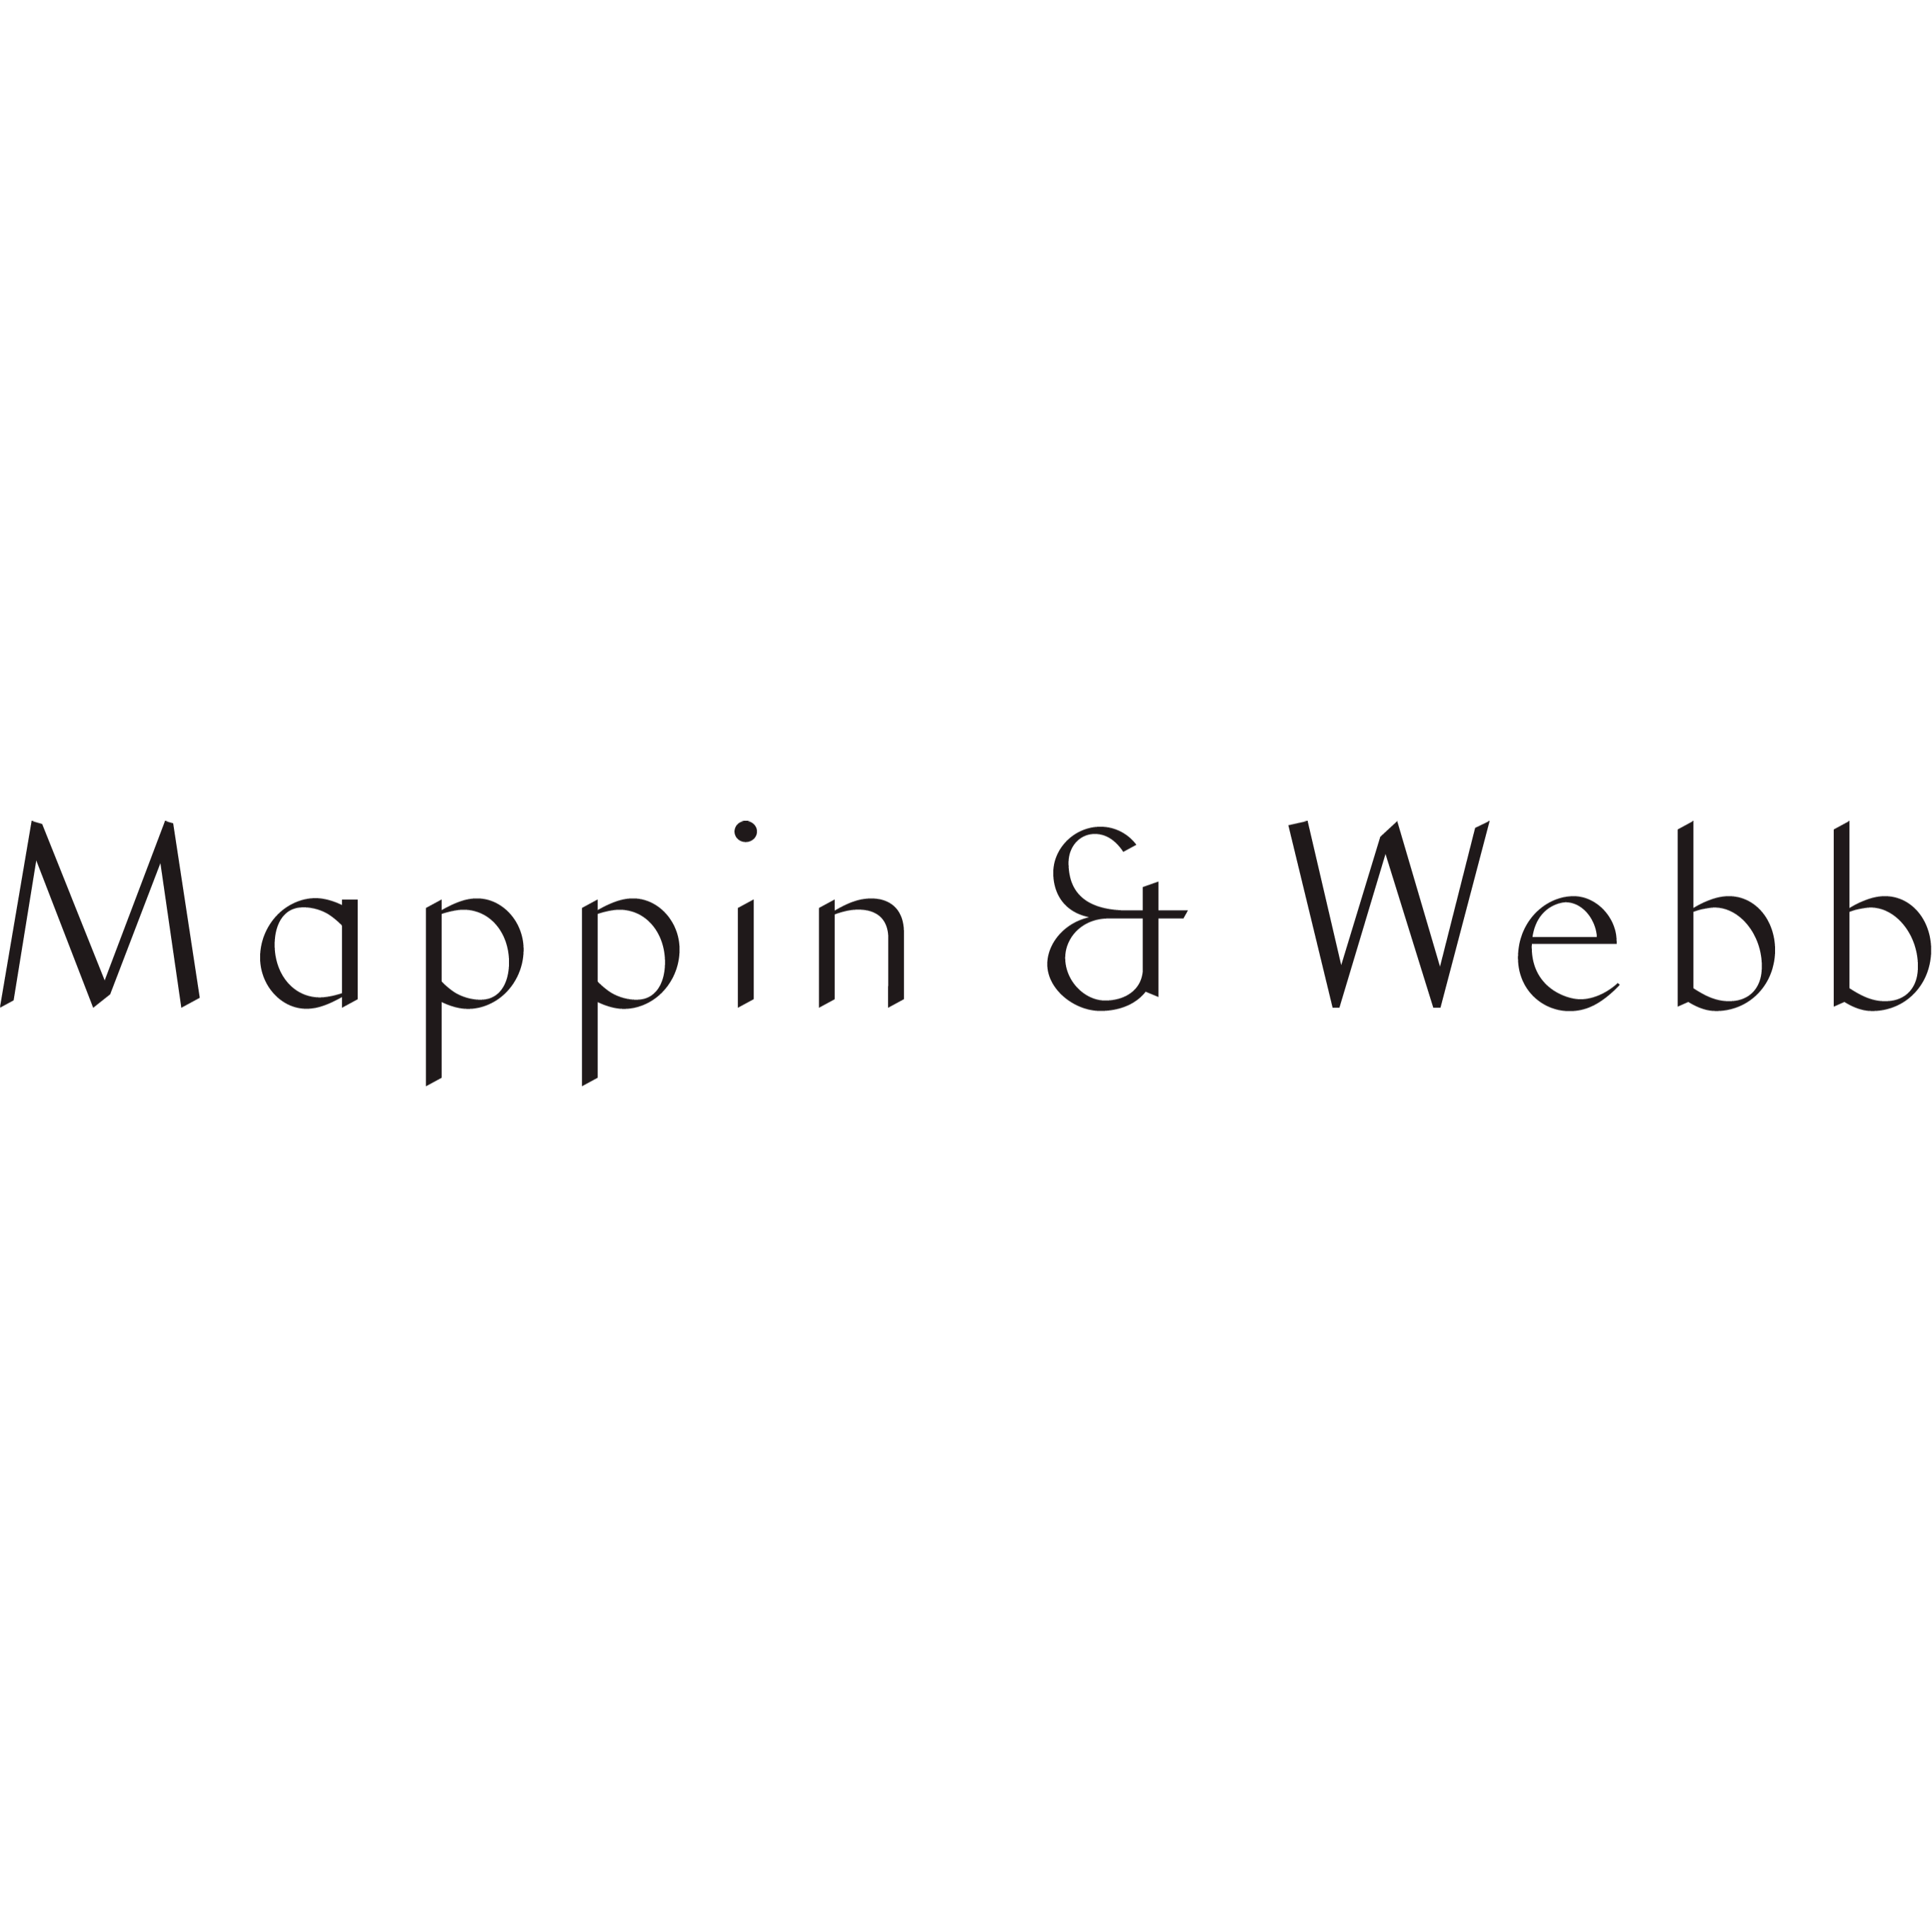 Mappin & Webb - Chester, Cheshire CH1 1LE - 01244 325938 | ShowMeLocal.com